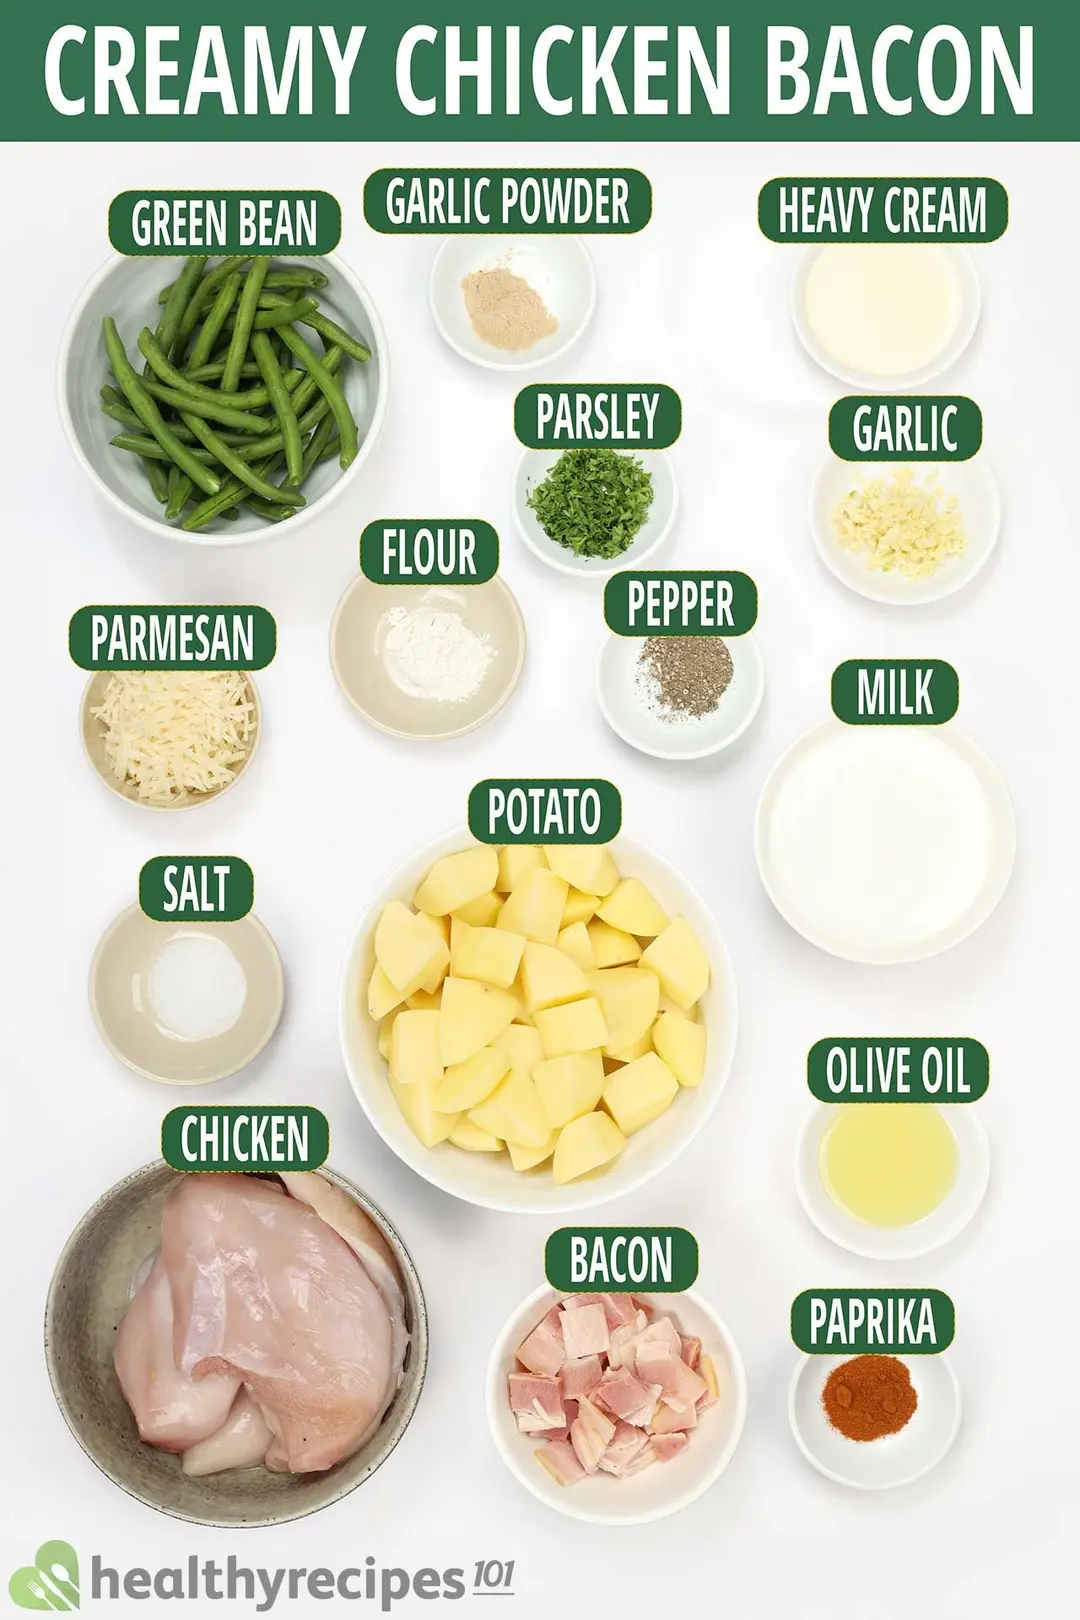 Ingredients for chicken bacon, including raw chicken breasts, raw bacon pieces, cubed potatoes, green beans, and various spices